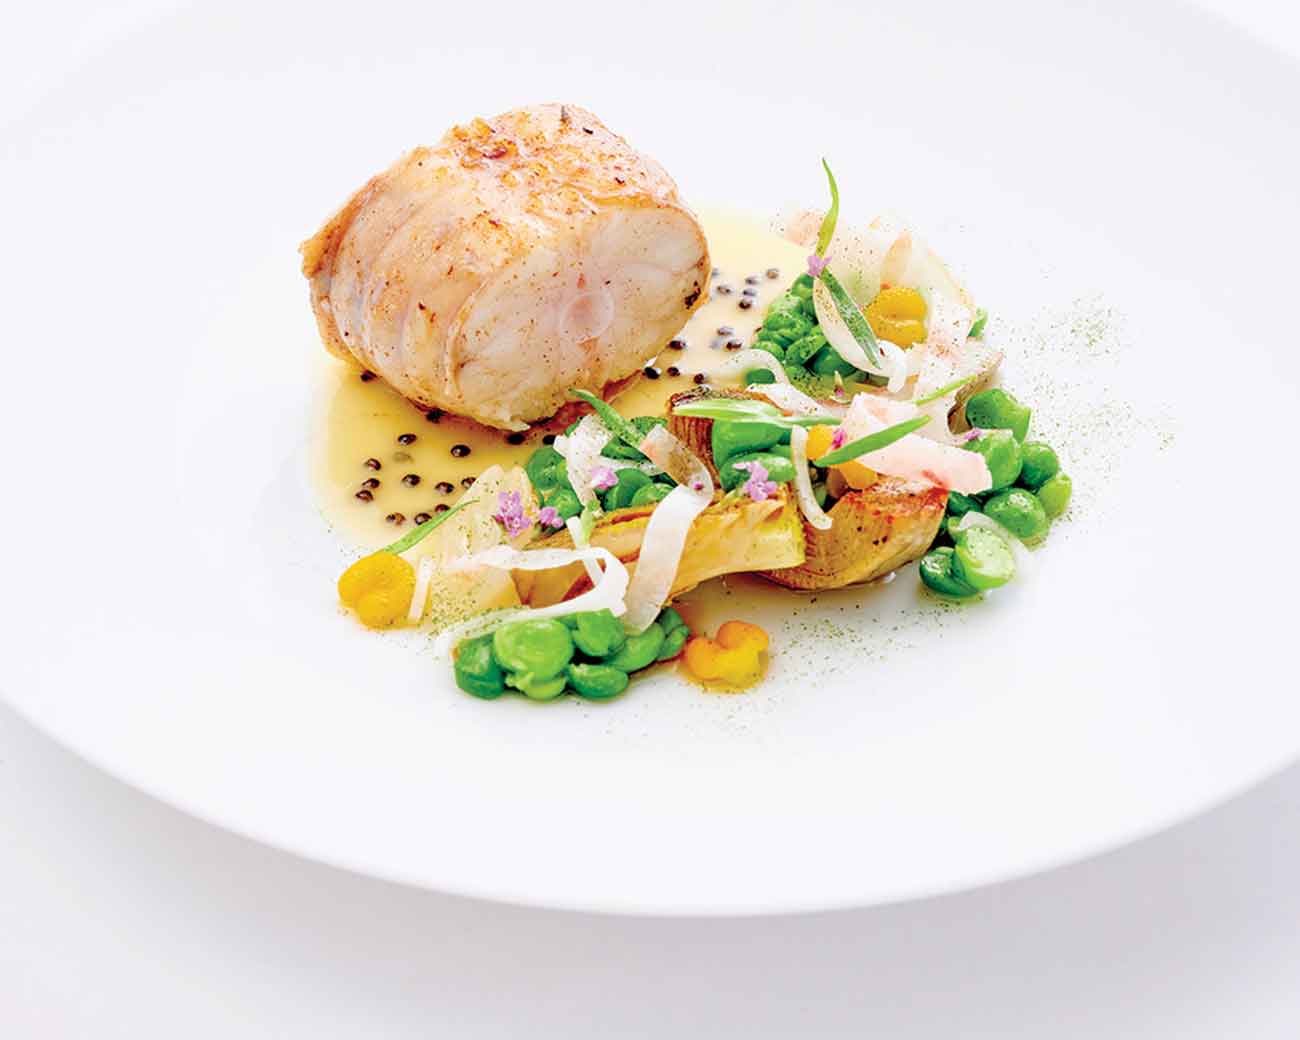 Dish of monkfish with vegetables